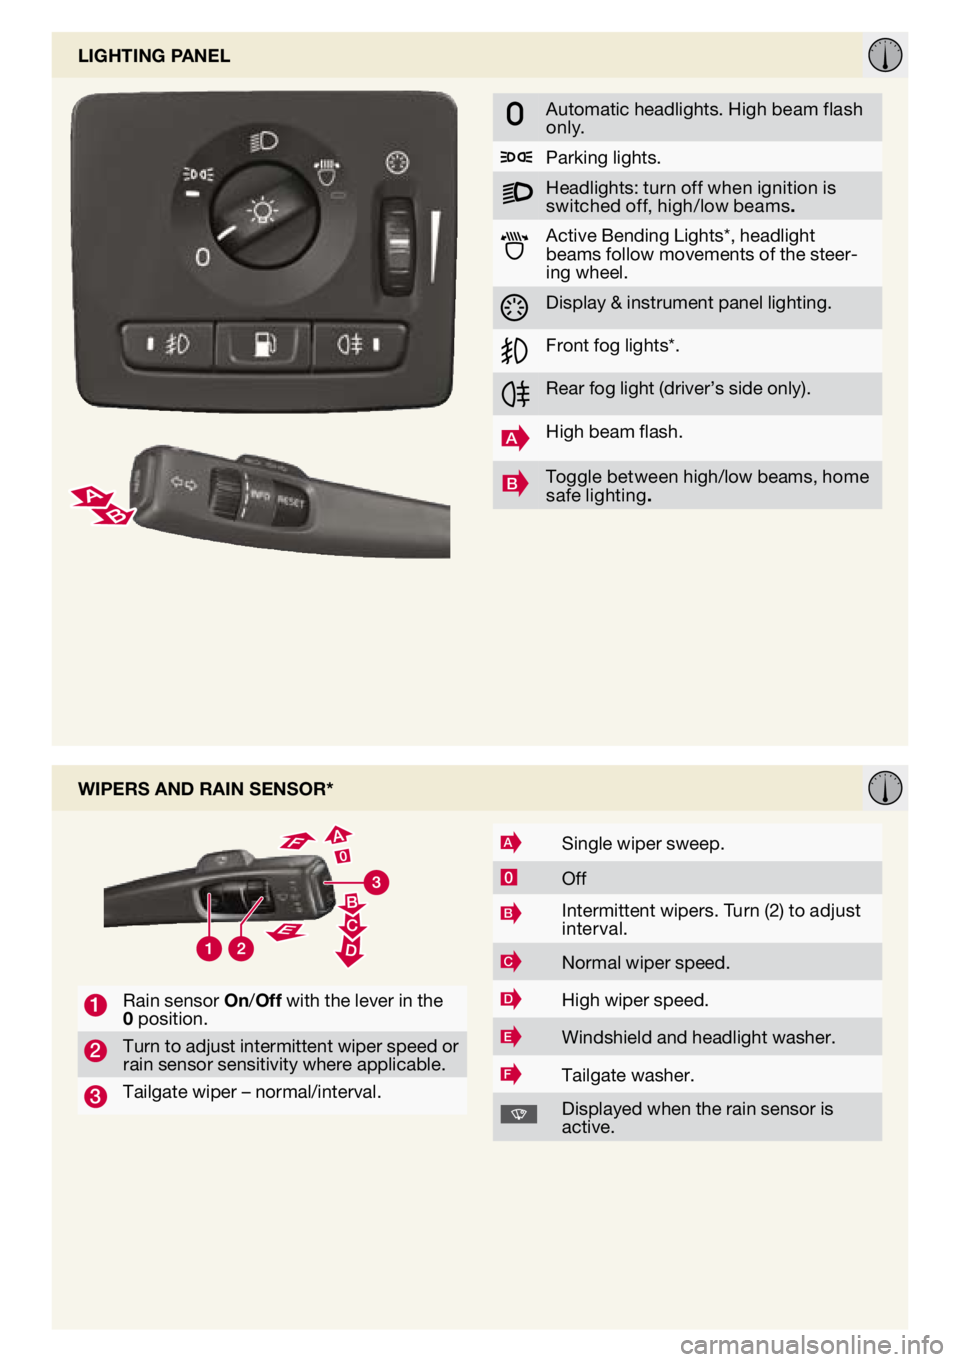 VOLVO V50 2010  Quick Guide 
lIghtIng panel
automatic headlights. High beam flash only.
Parking lights.
Headlights: turn off when ignition is switched off, high/low beams.
active bending  lights*, headlight beams follow movement